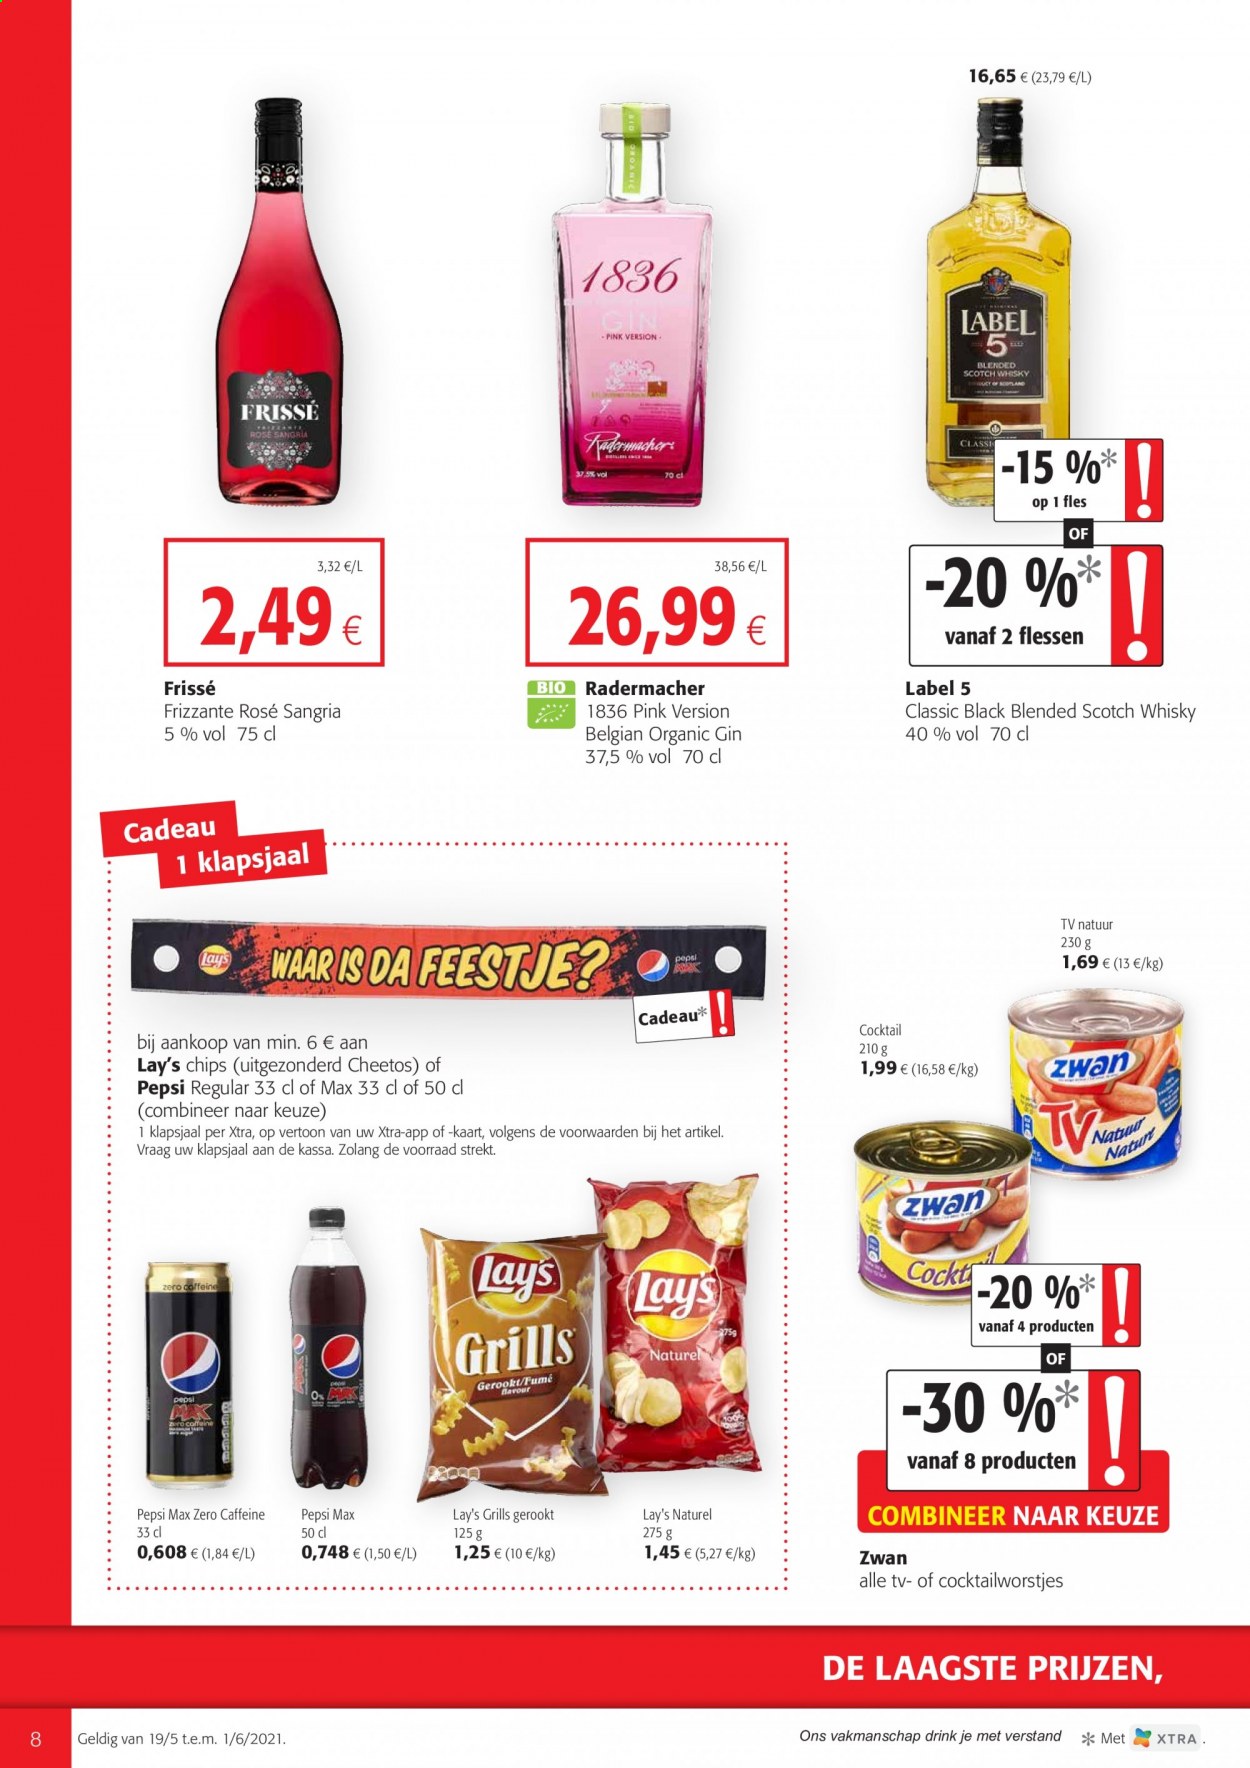 thumbnail - Colruyt-aanbieding - 19/05/2021 - 01/06/2021 -  producten in de aanbieding - blended scotch whisky, cheetos, Pepsi, scotch whisky, chips, whisky, gin. Pagina 8.